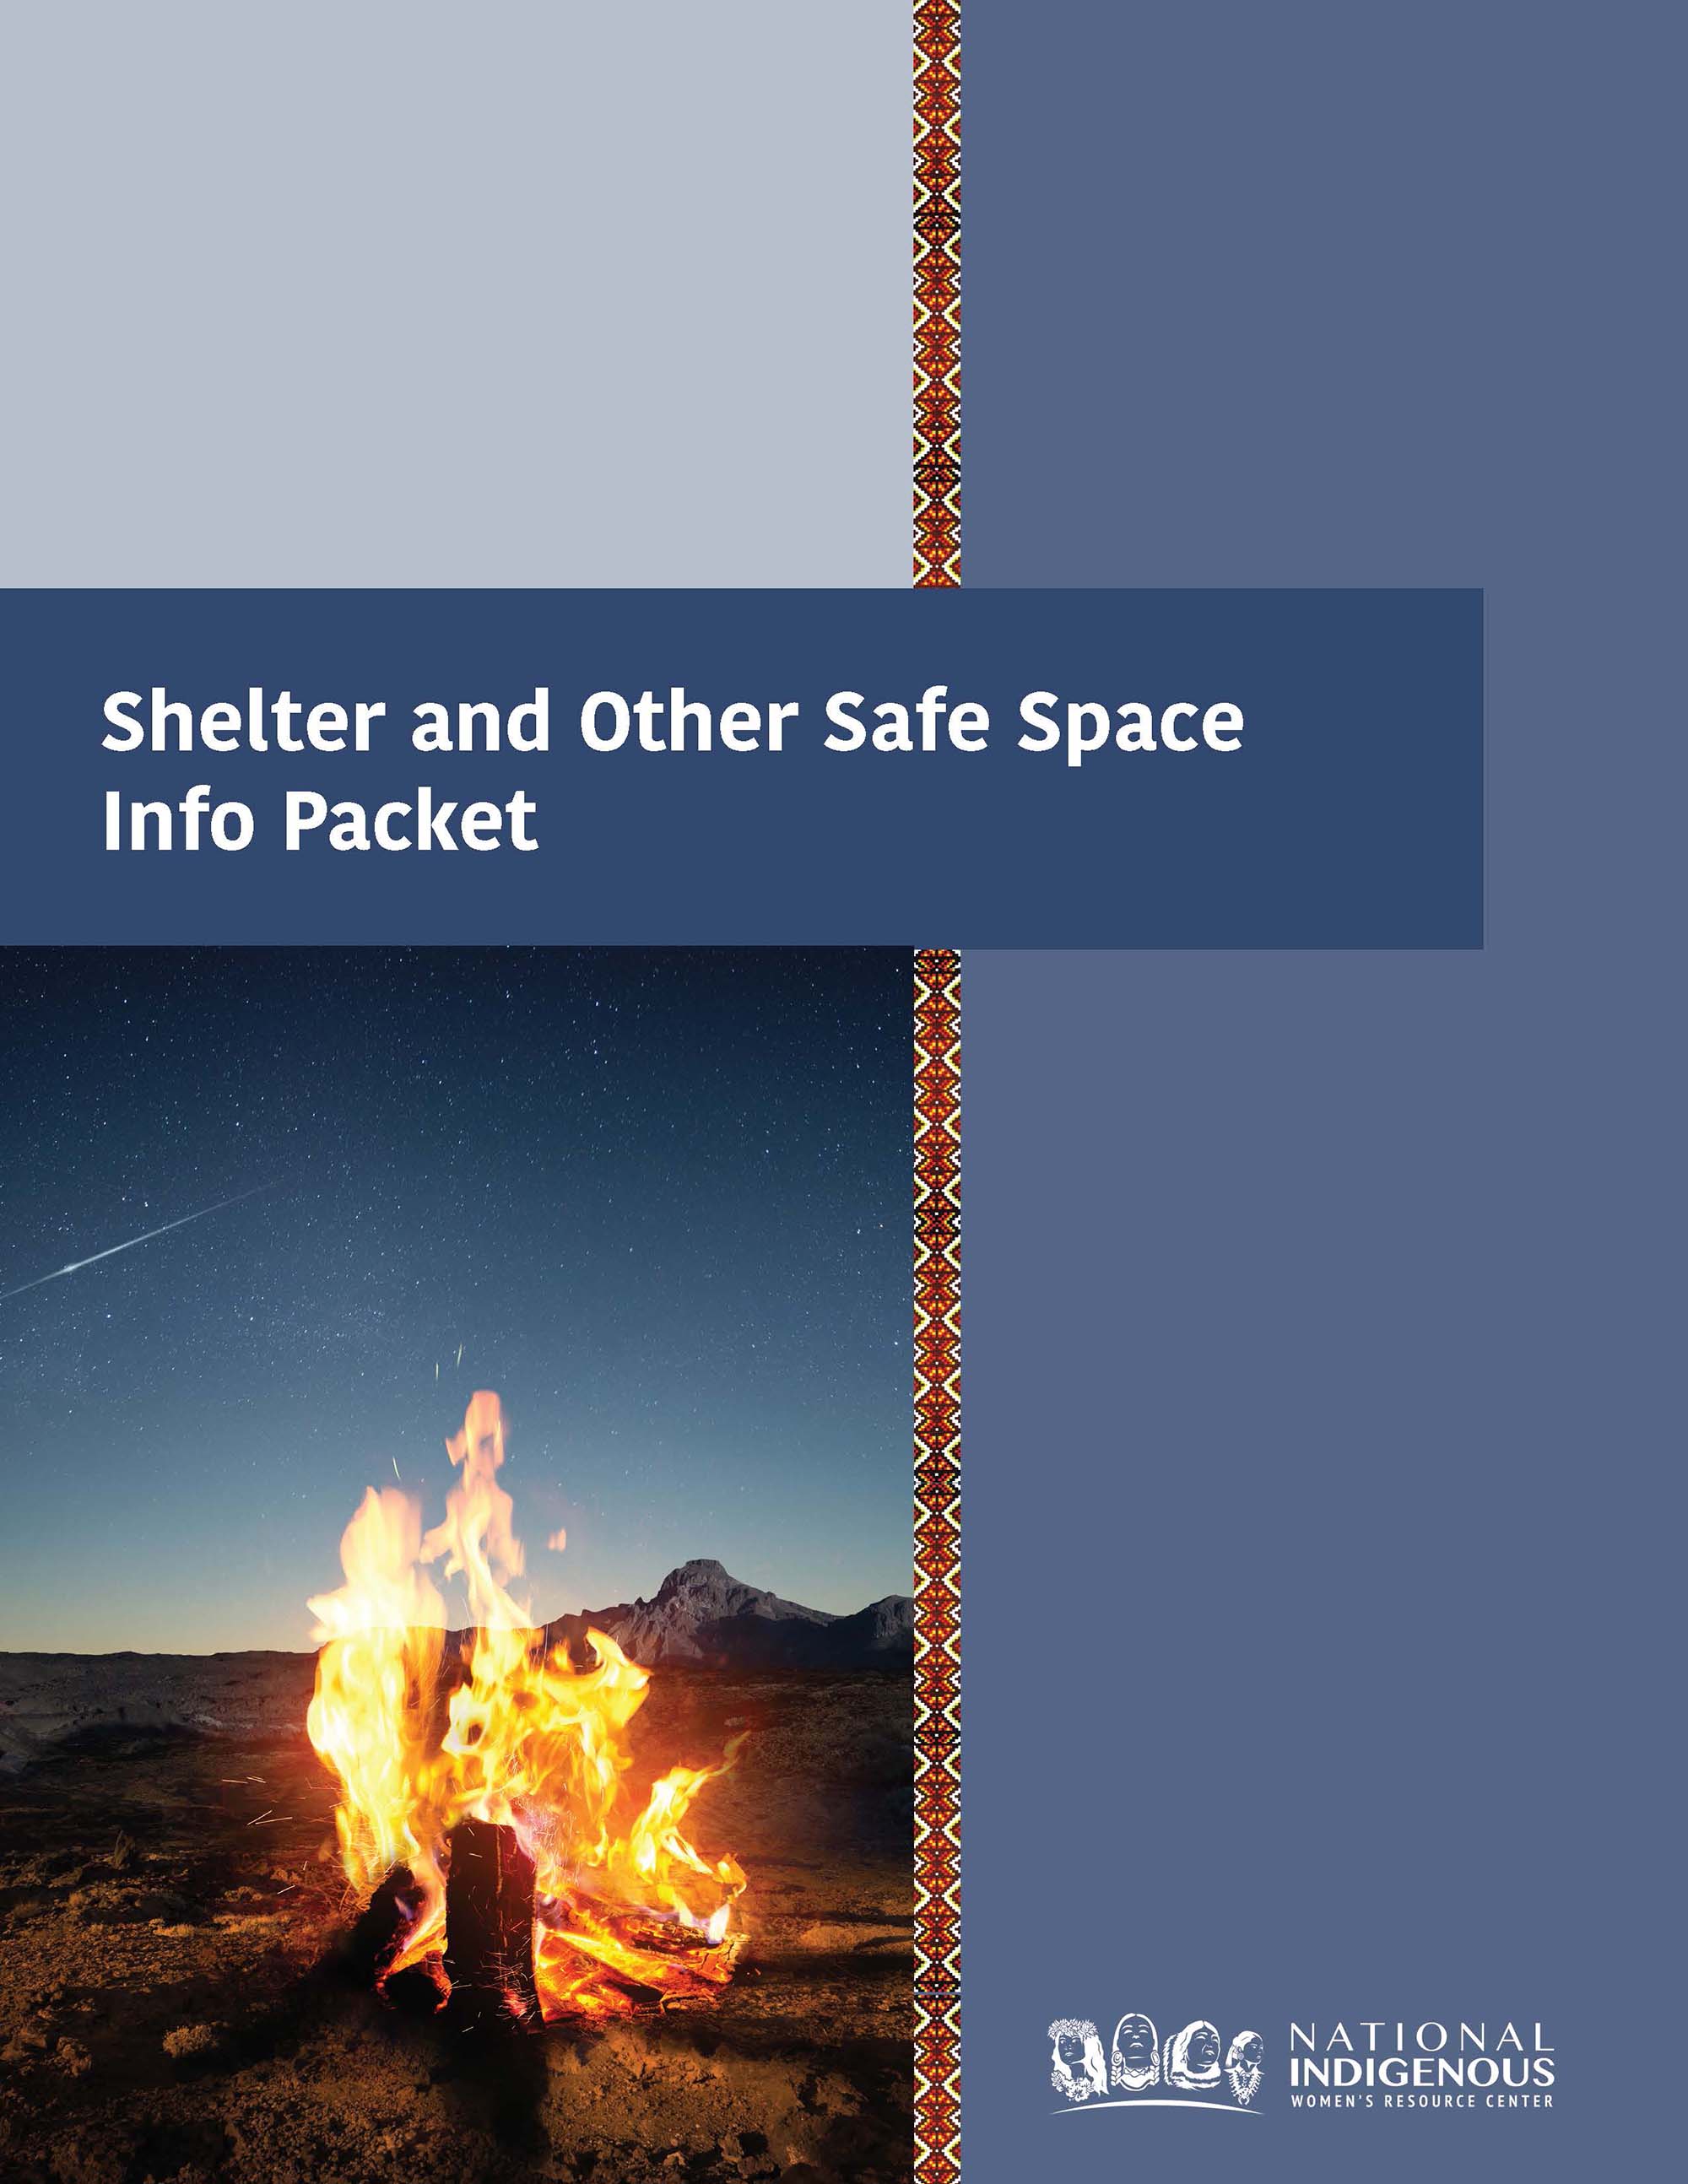 Dark blue and light blue background with yellow and orange pattern in the middle with photo of a campfire in front of mountains and dark blue sky in the foreground. Text above campfire image: Shelter and Other Safe Space Info Packet. White NIWRC logo in bottom corner.